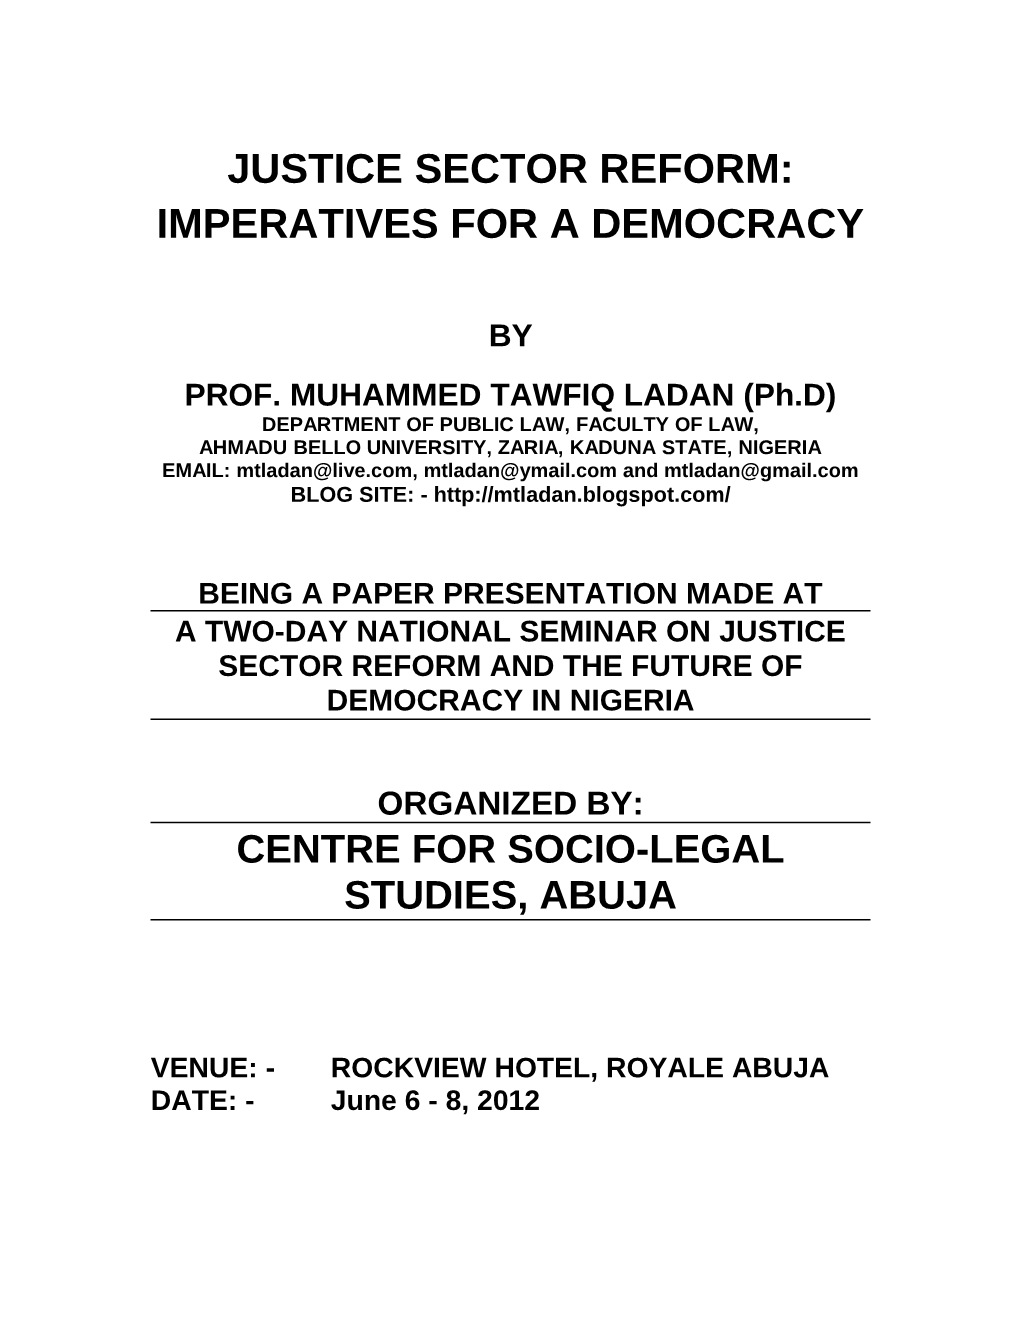 Access to Justice and the Justice Sector Reform in Nigeria